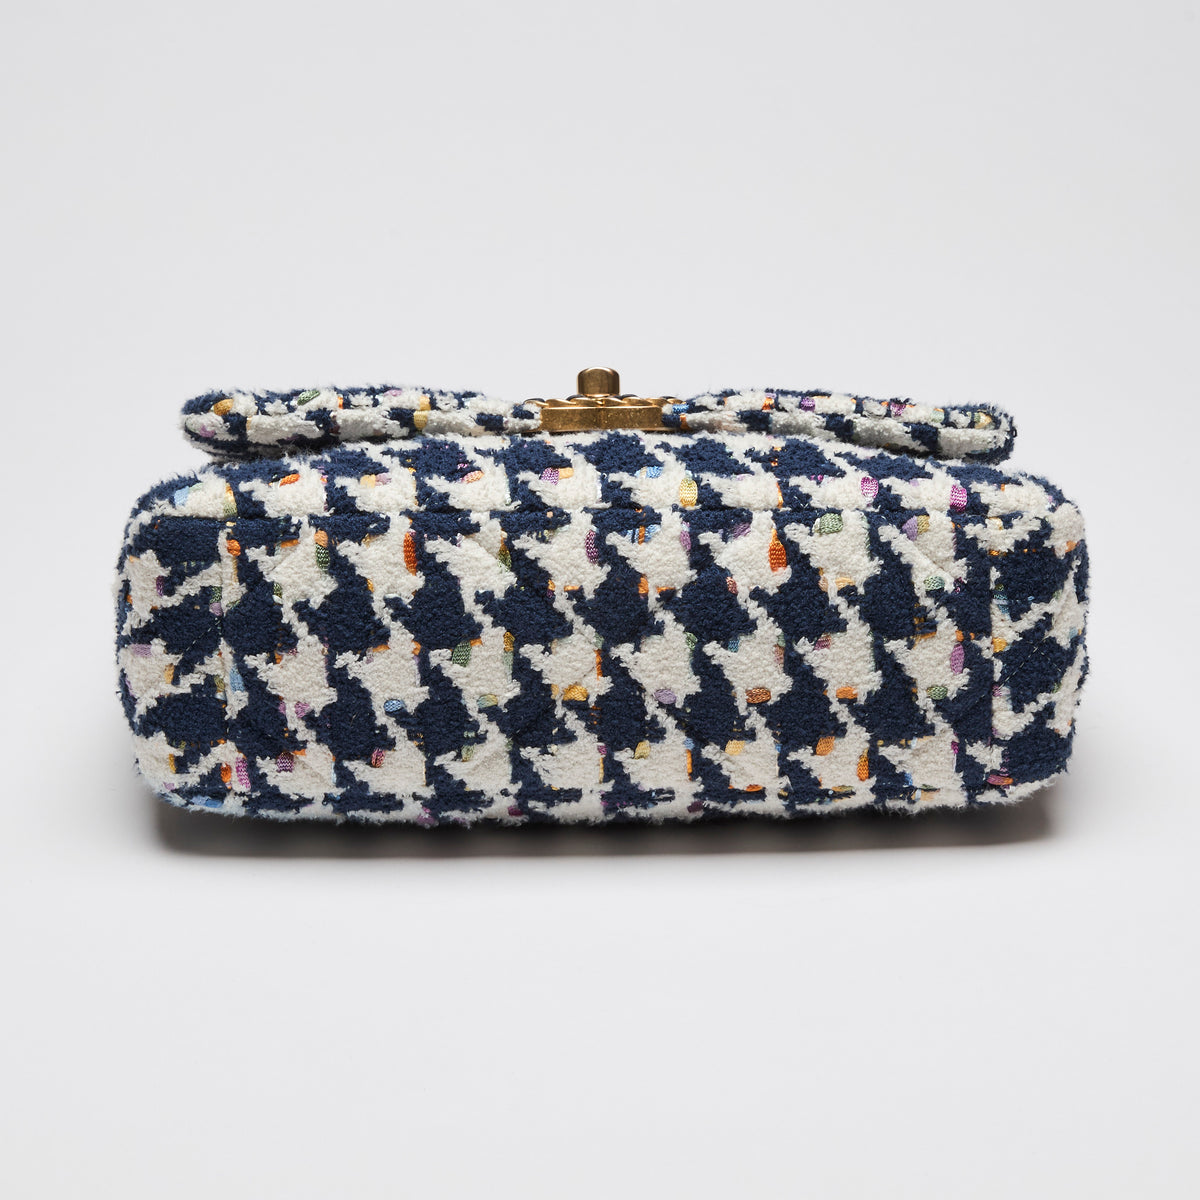 Excellent Pre-Loved Chanel Tweed Quilted Navy Blue Multicolor Small 19 Handbag (Bottom)